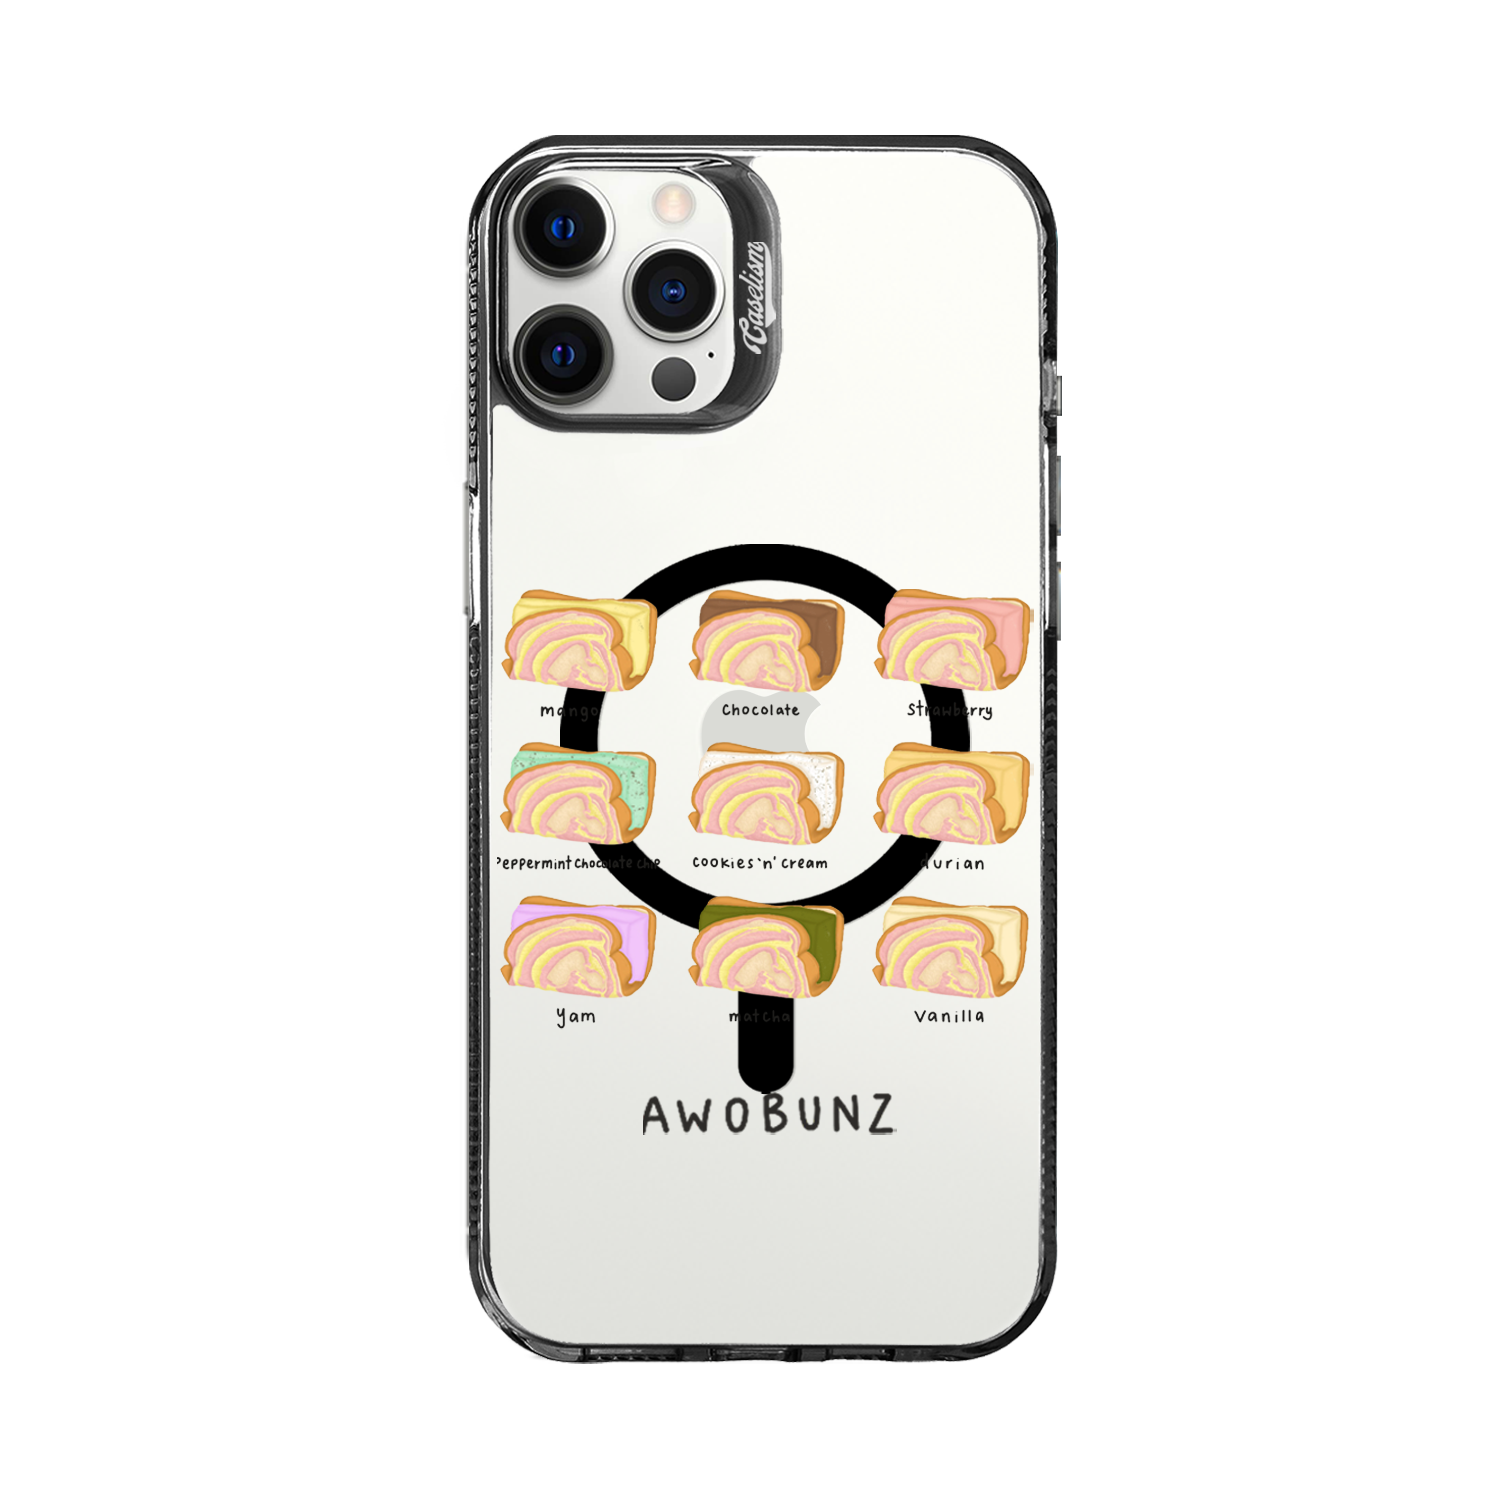 AWOB003 - ColorLite Case for iPhone